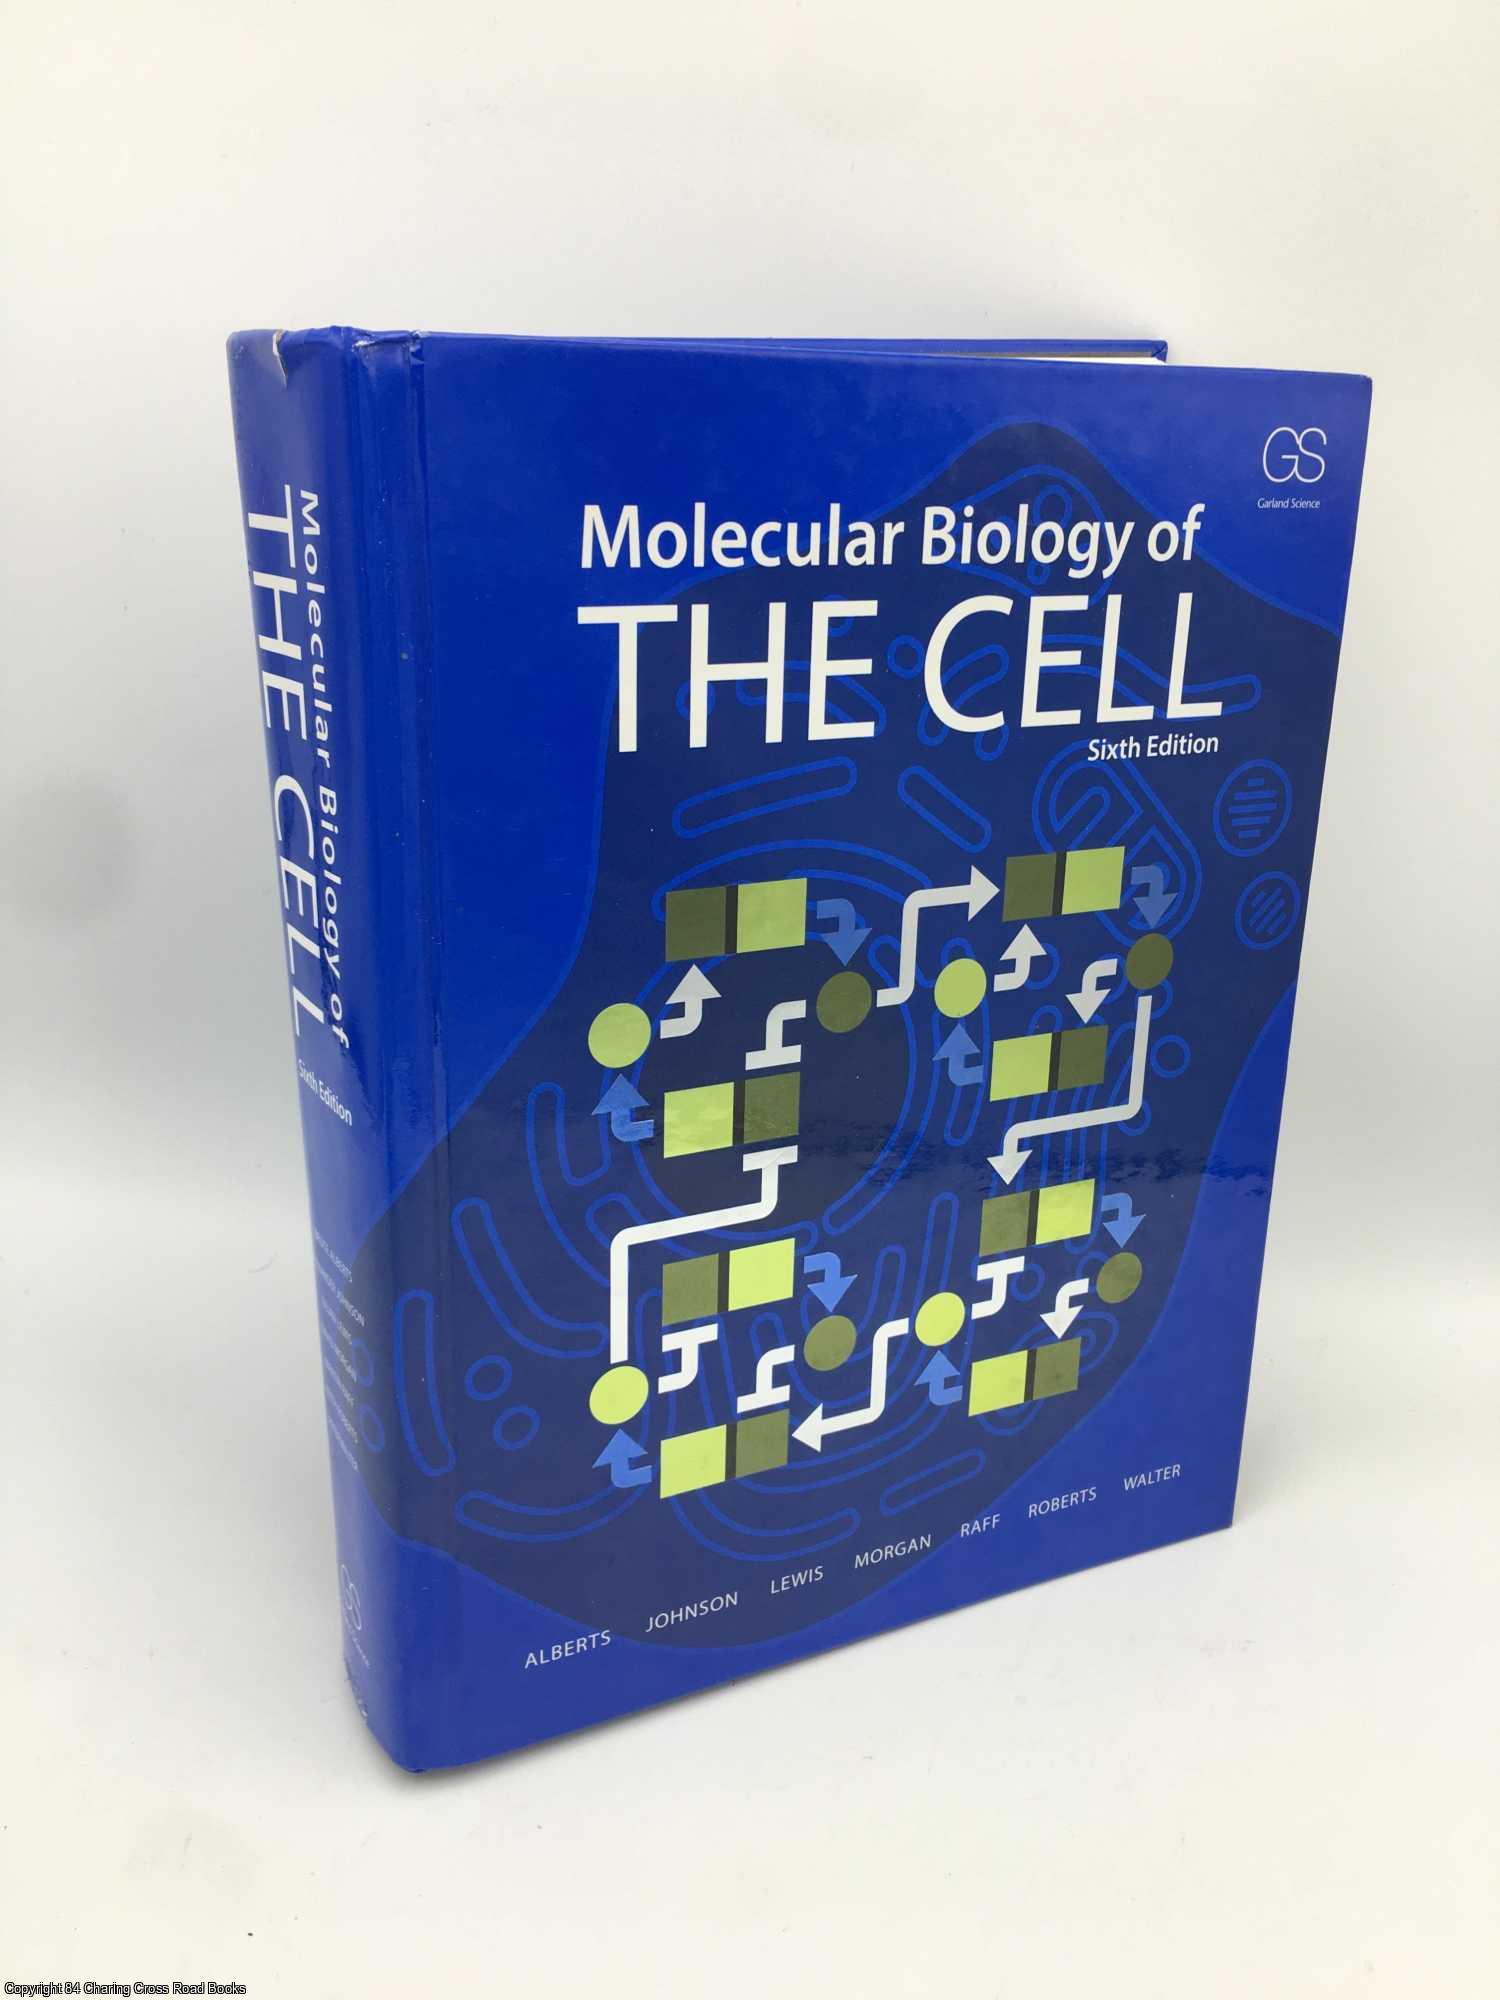 Molecular Biology of the Cell 6th Edition by Bruce Alberts on 84 Charing  Cross Rare Books